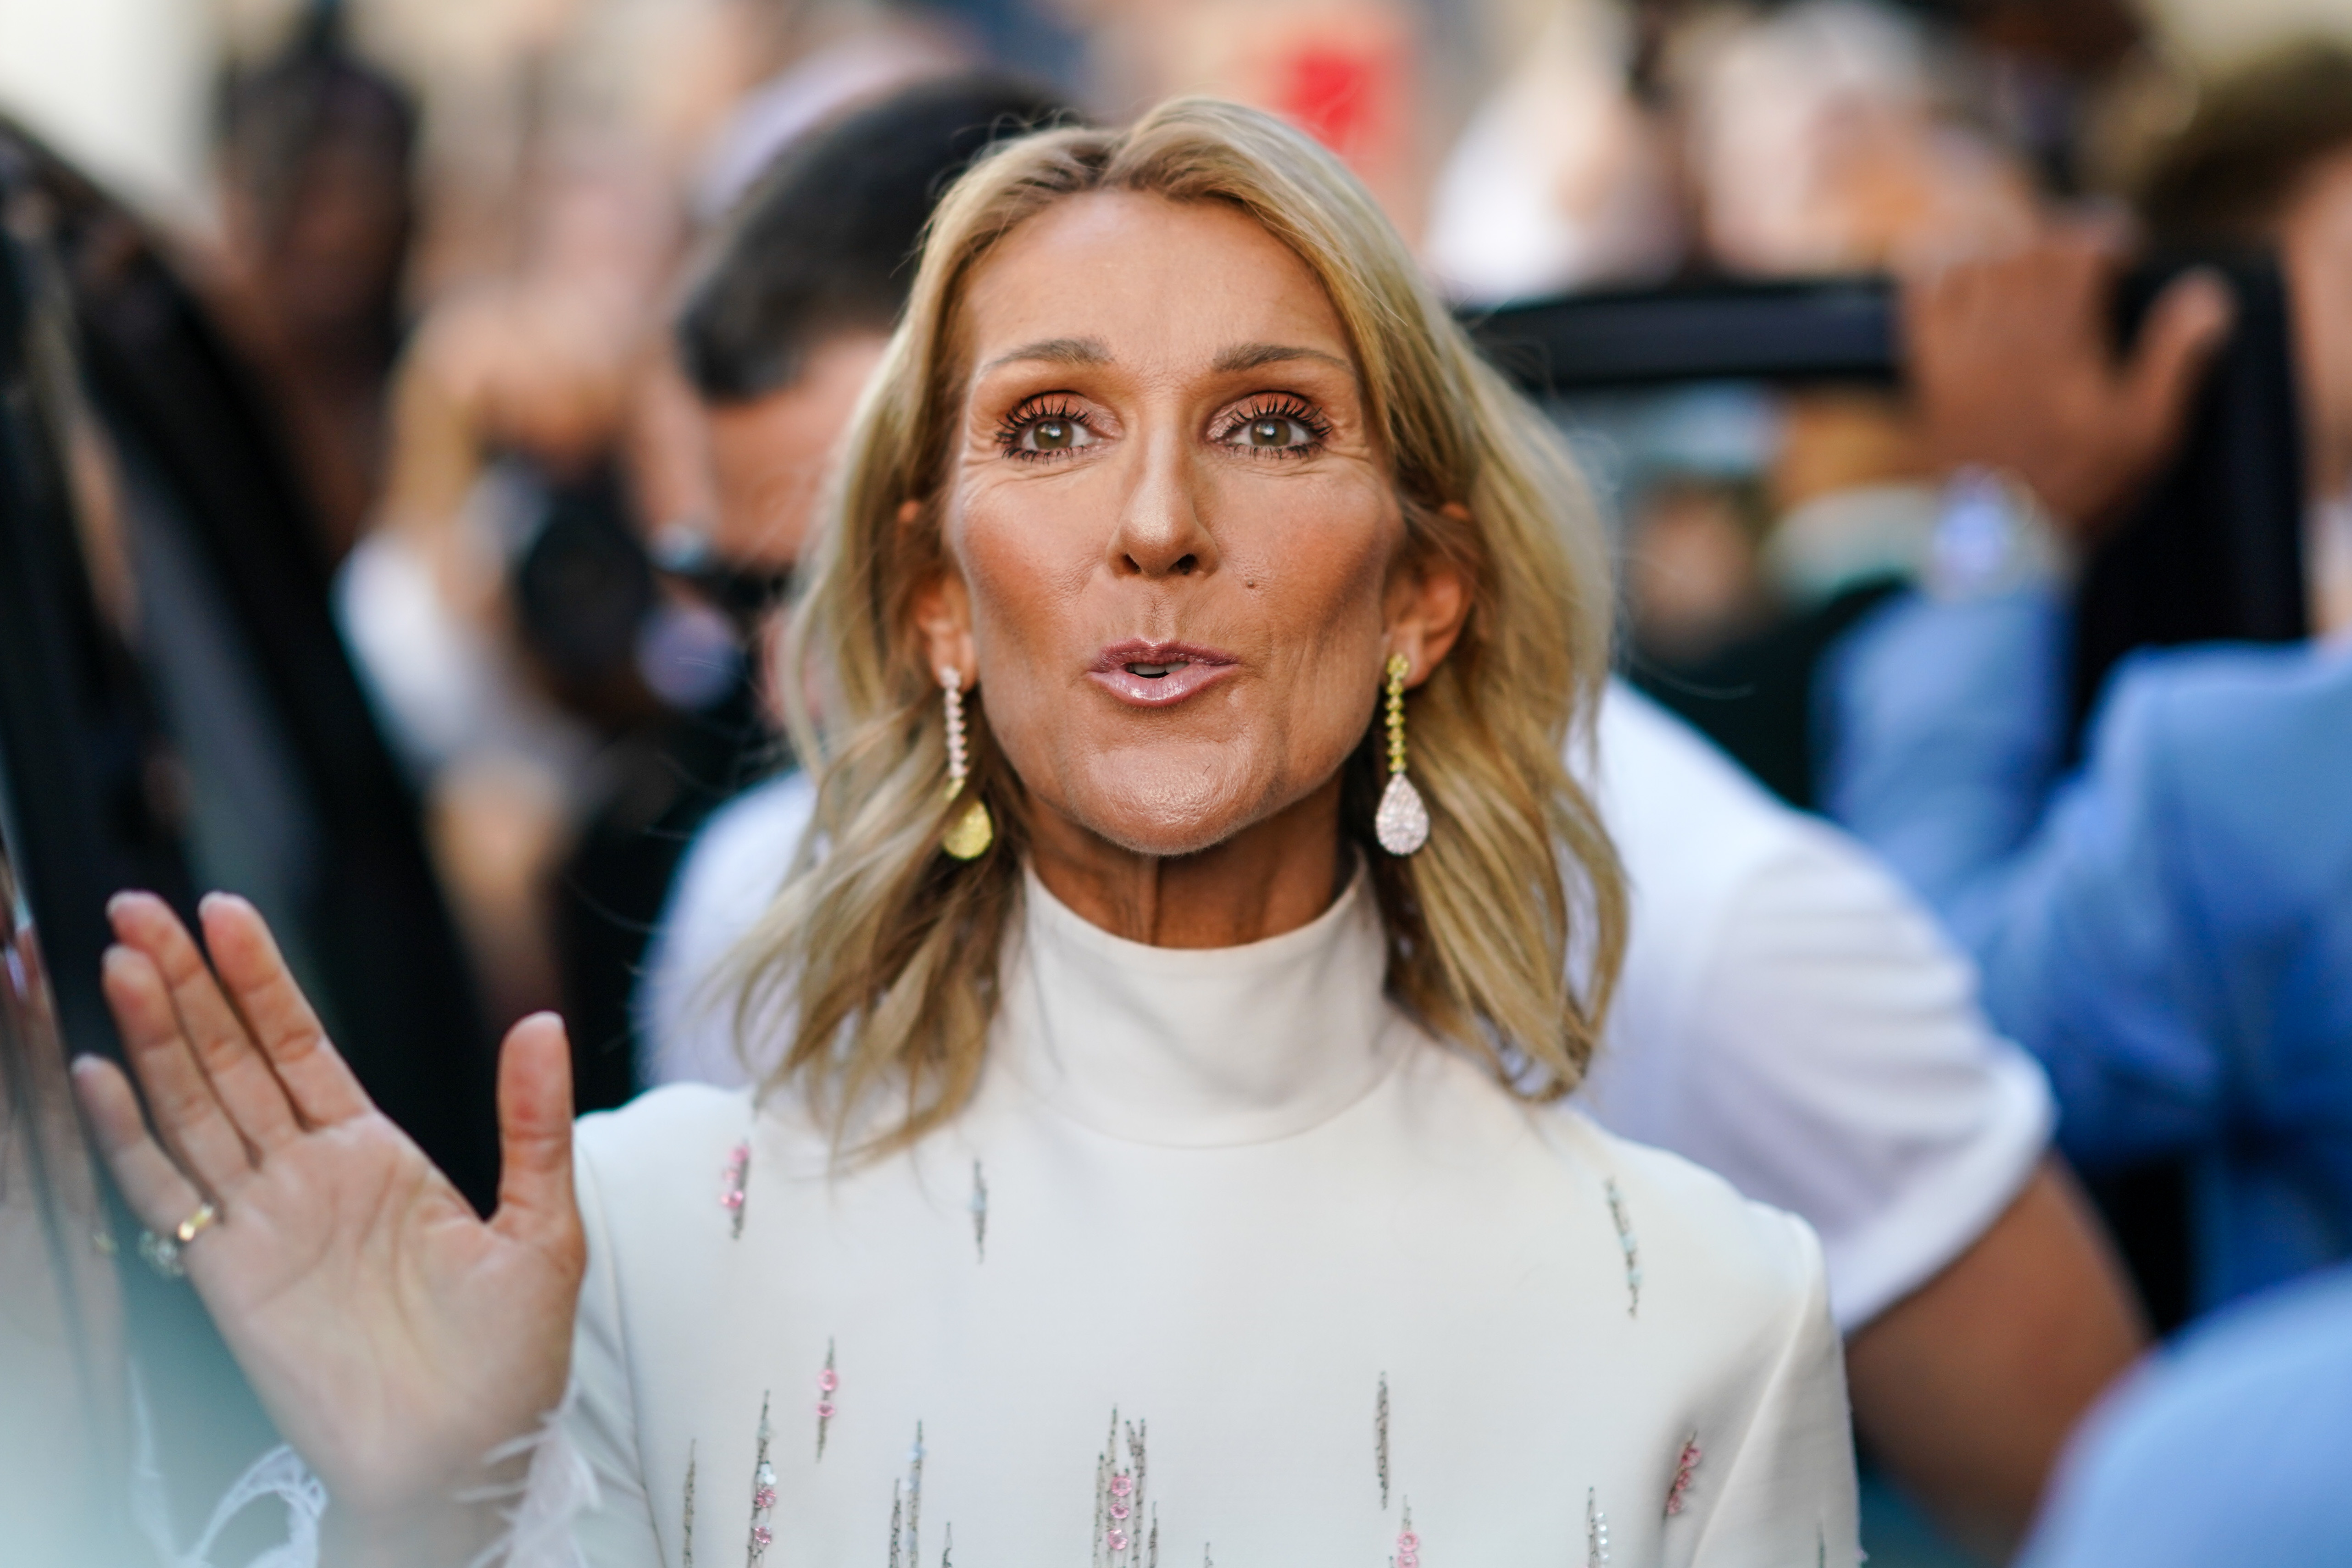 Celine Dion is seen outside Valentino during Paris Fashion Week Haute Couture Fall/Winter 2019/20, in Paris, France on July 3, 2019 | Source: Getty Images